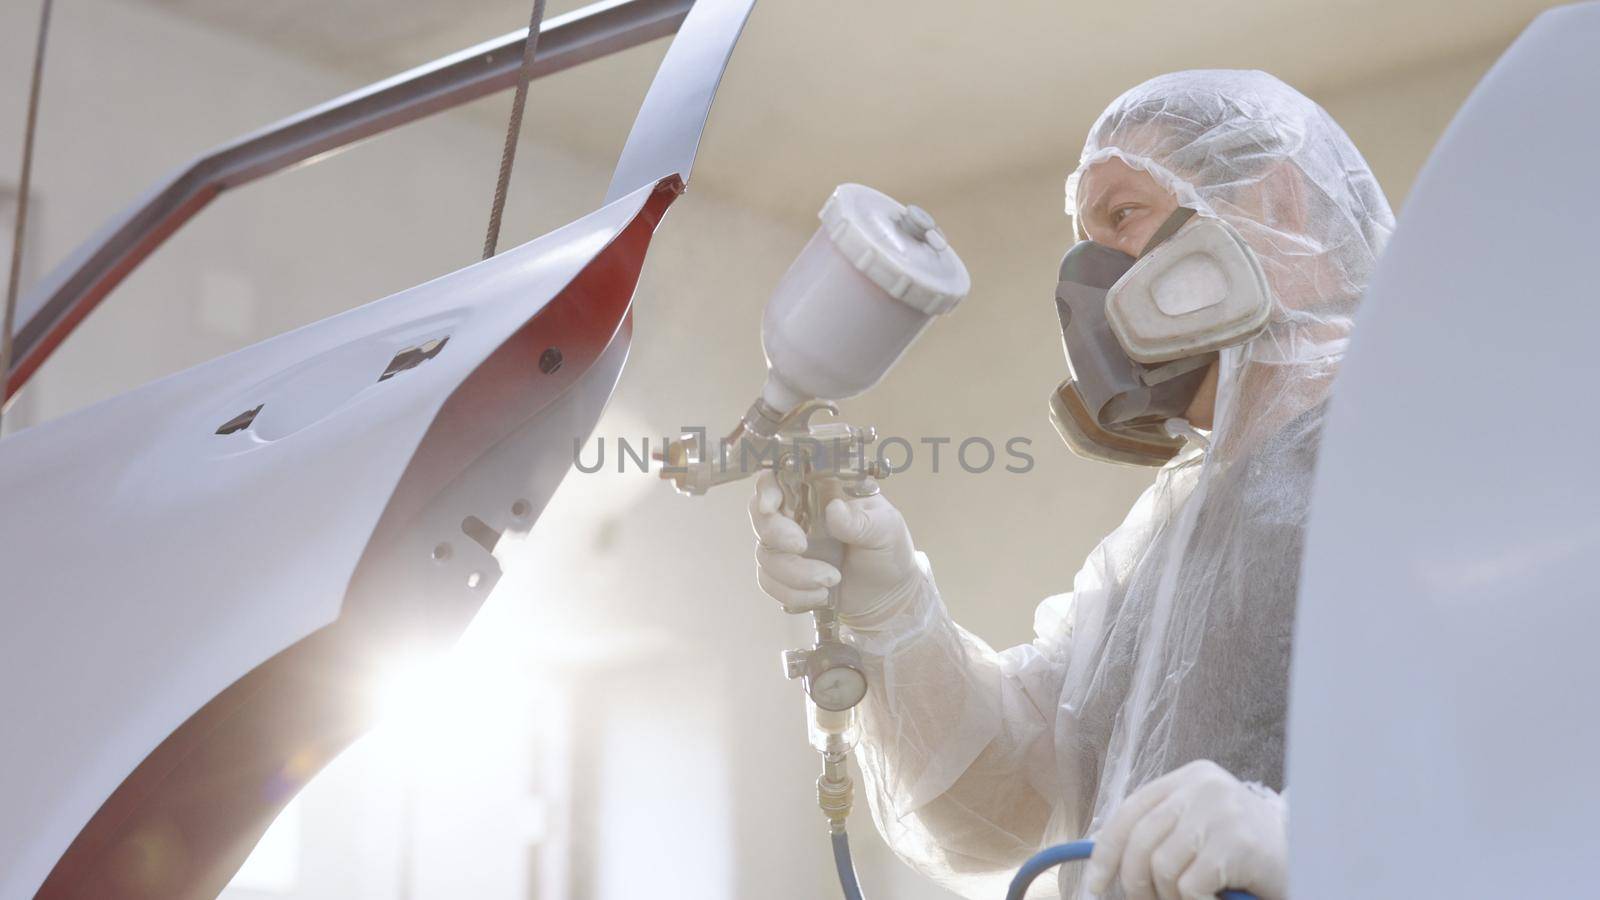 Master is painting part of automobile in car service. He is using spraying machine, holding it in hand, dressed in protective uniform. Modern car painting. by uflypro